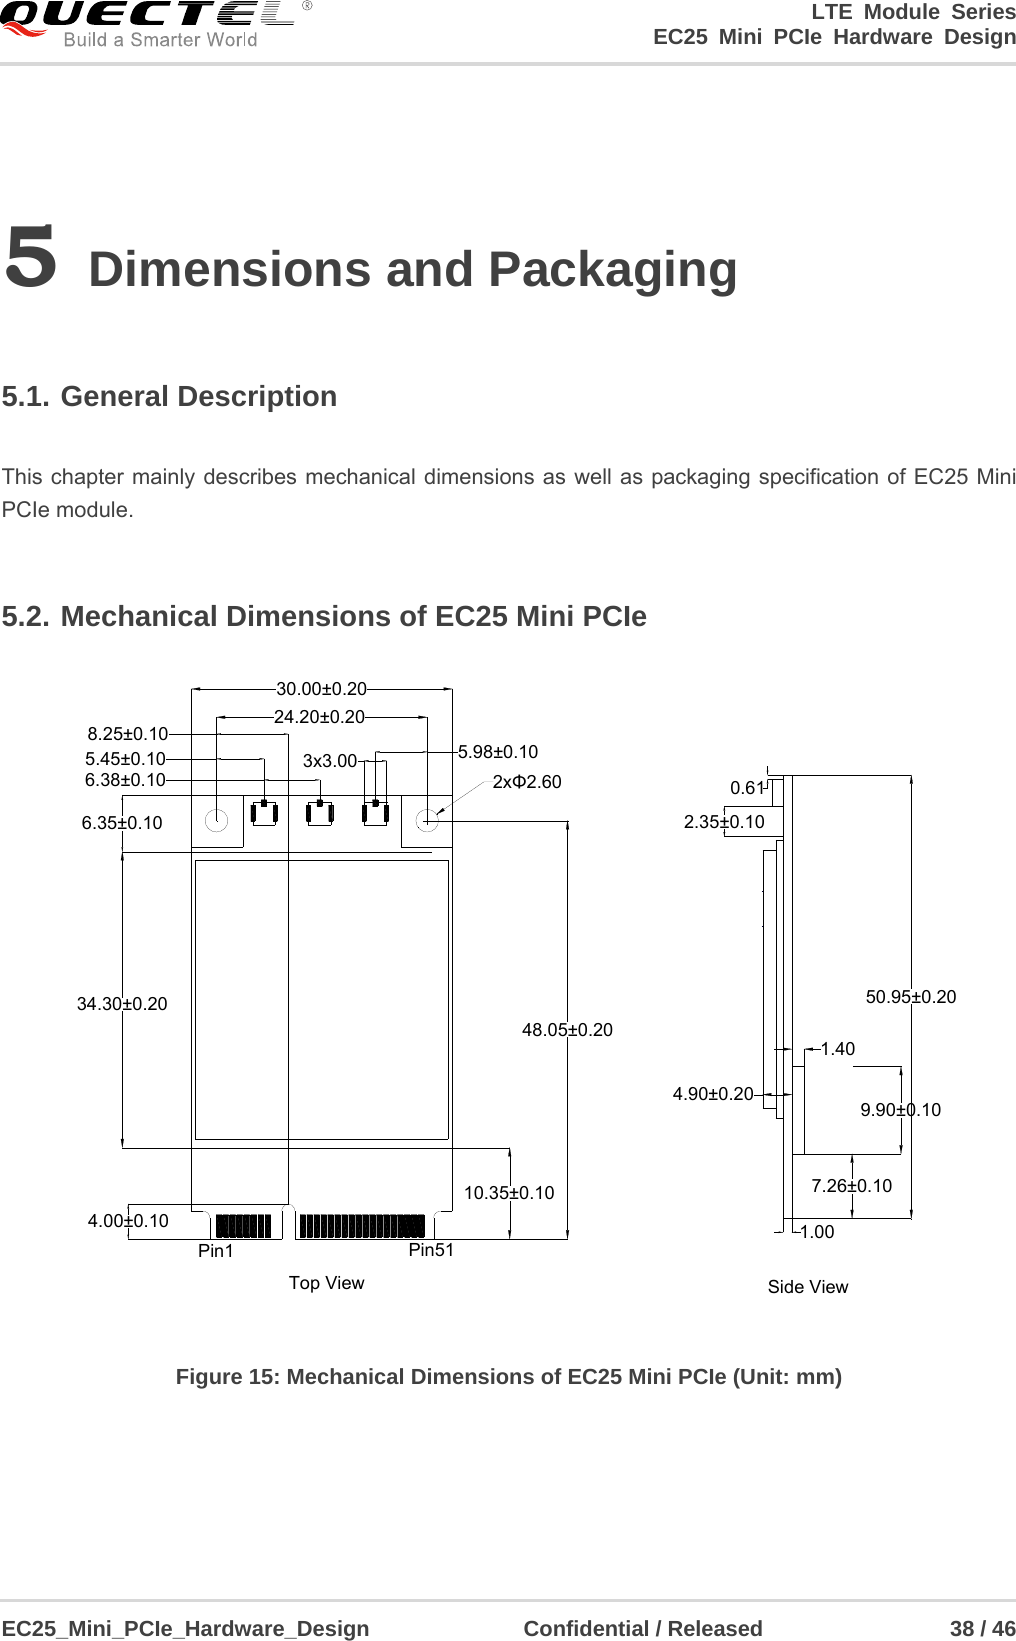                                        LTE Module Series                                                  EC25 Mini PCIe Hardware Design  EC25_Mini_PCIe_Hardware_Design              Confidential / Released                 38 / 46    5 Dimensions and Packaging  5.1. General Description  This chapter mainly describes mechanical dimensions as well as packaging specification of EC25 Mini PCIe module.  5.2. Mechanical Dimensions of EC25 Mini PCIe 10.35±0.1034.30±0.204.00±0.1048.05±0.206.35±0.103x3.00 5.98±0.106.38±0.105.45±0.108.25±0.10 24.20±0.2030.00±0.20Pin1 Pin51Top View1.007.26±0.101.404.90±0.200.612.35±0.1050.95±0.209.90±0.10Side View2xΦ2.60 Figure 15: Mechanical Dimensions of EC25 Mini PCIe (Unit: mm)   